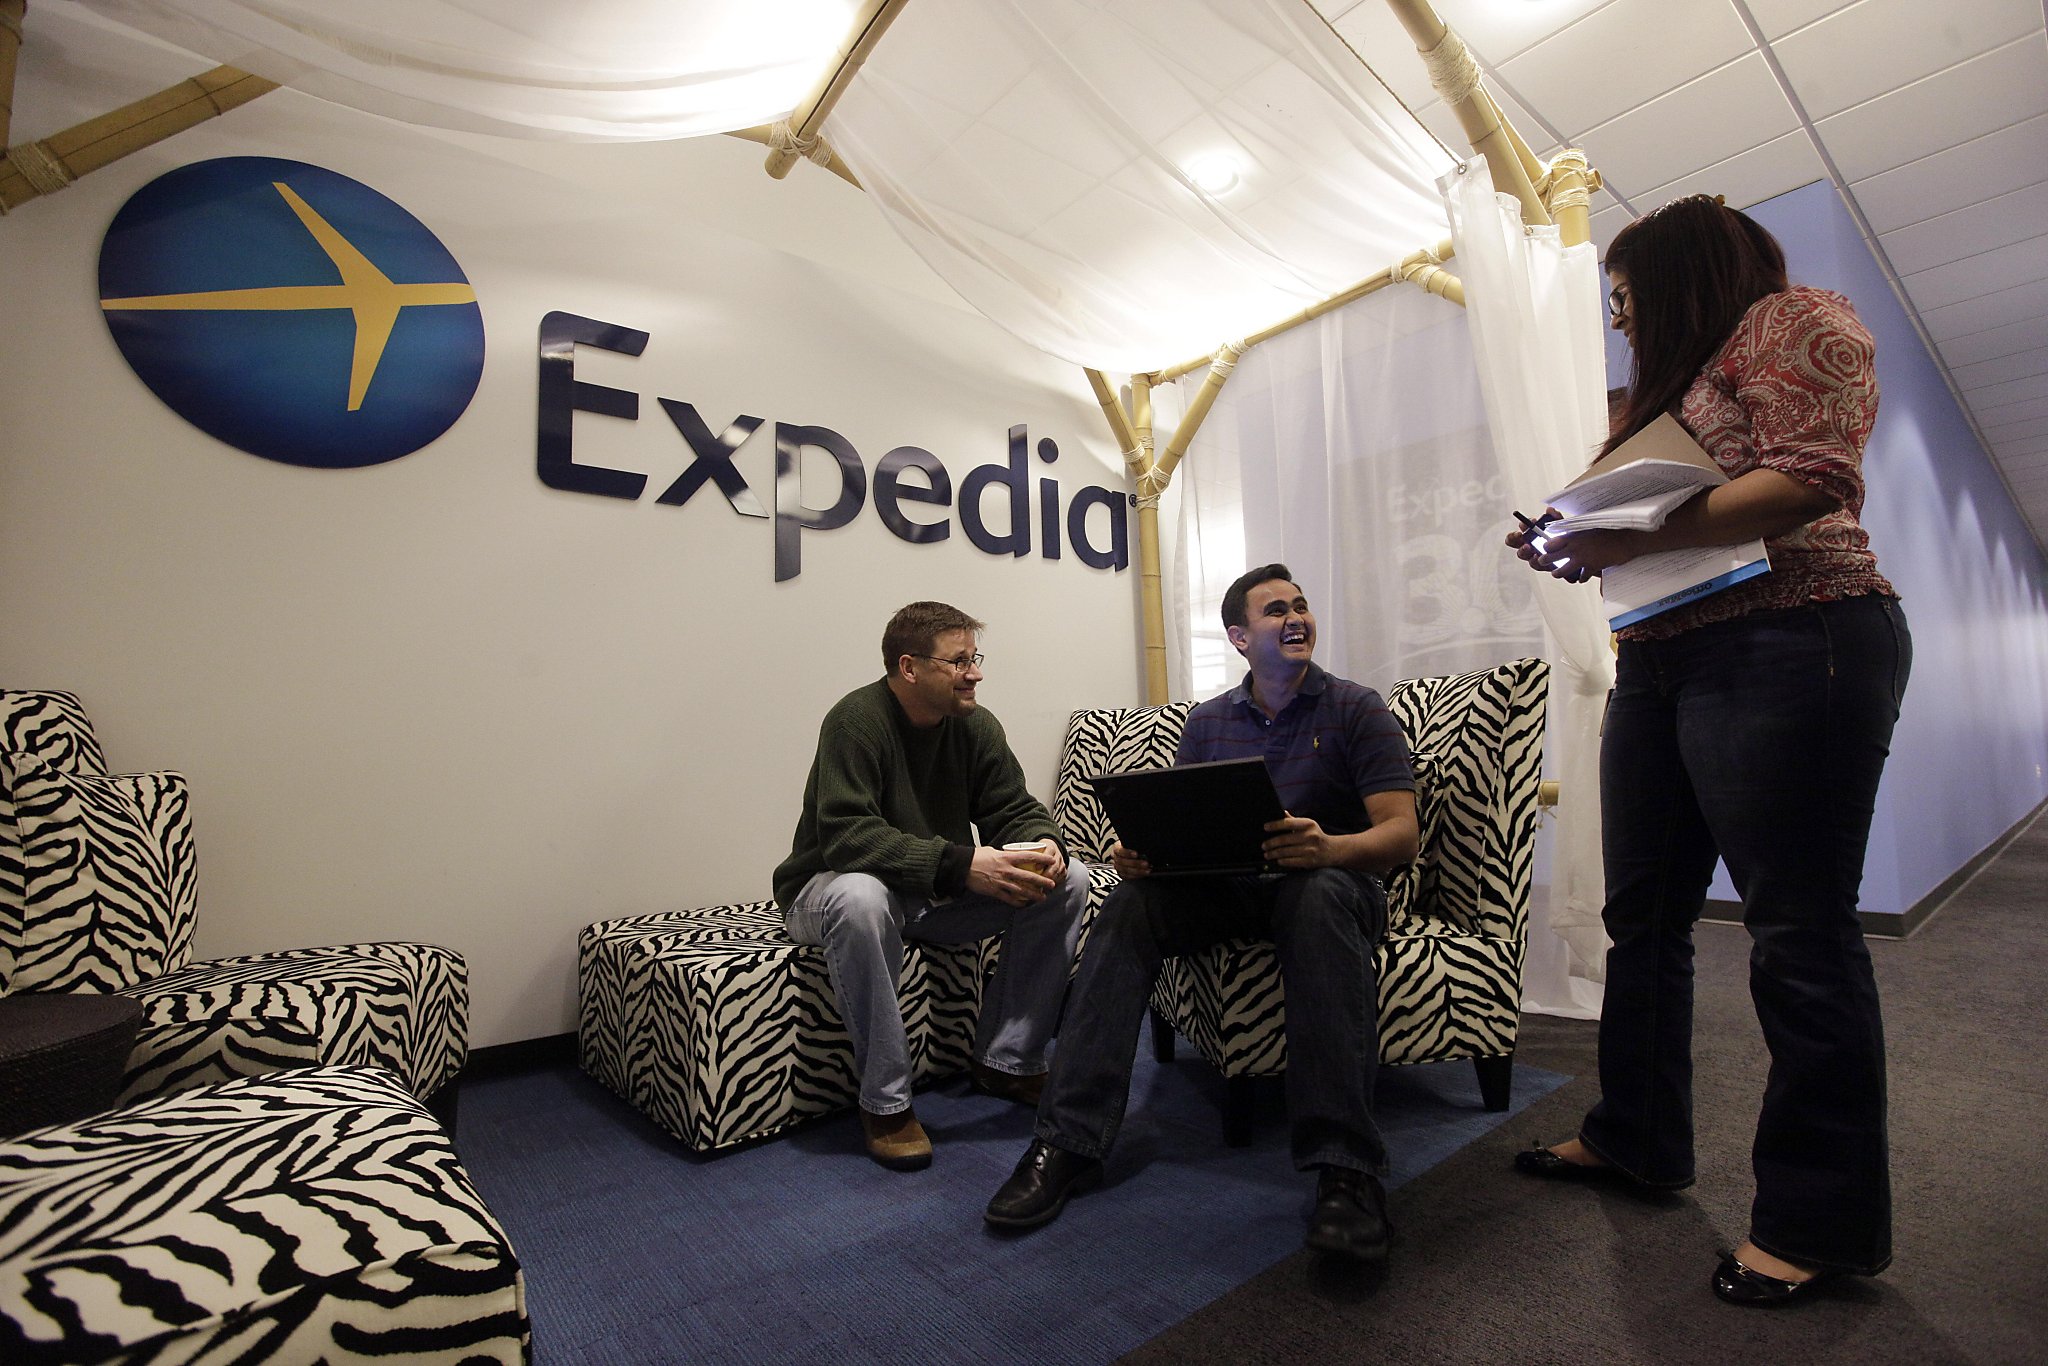 Travel Troubleshooter: Expedia's check is 'in the mail'?